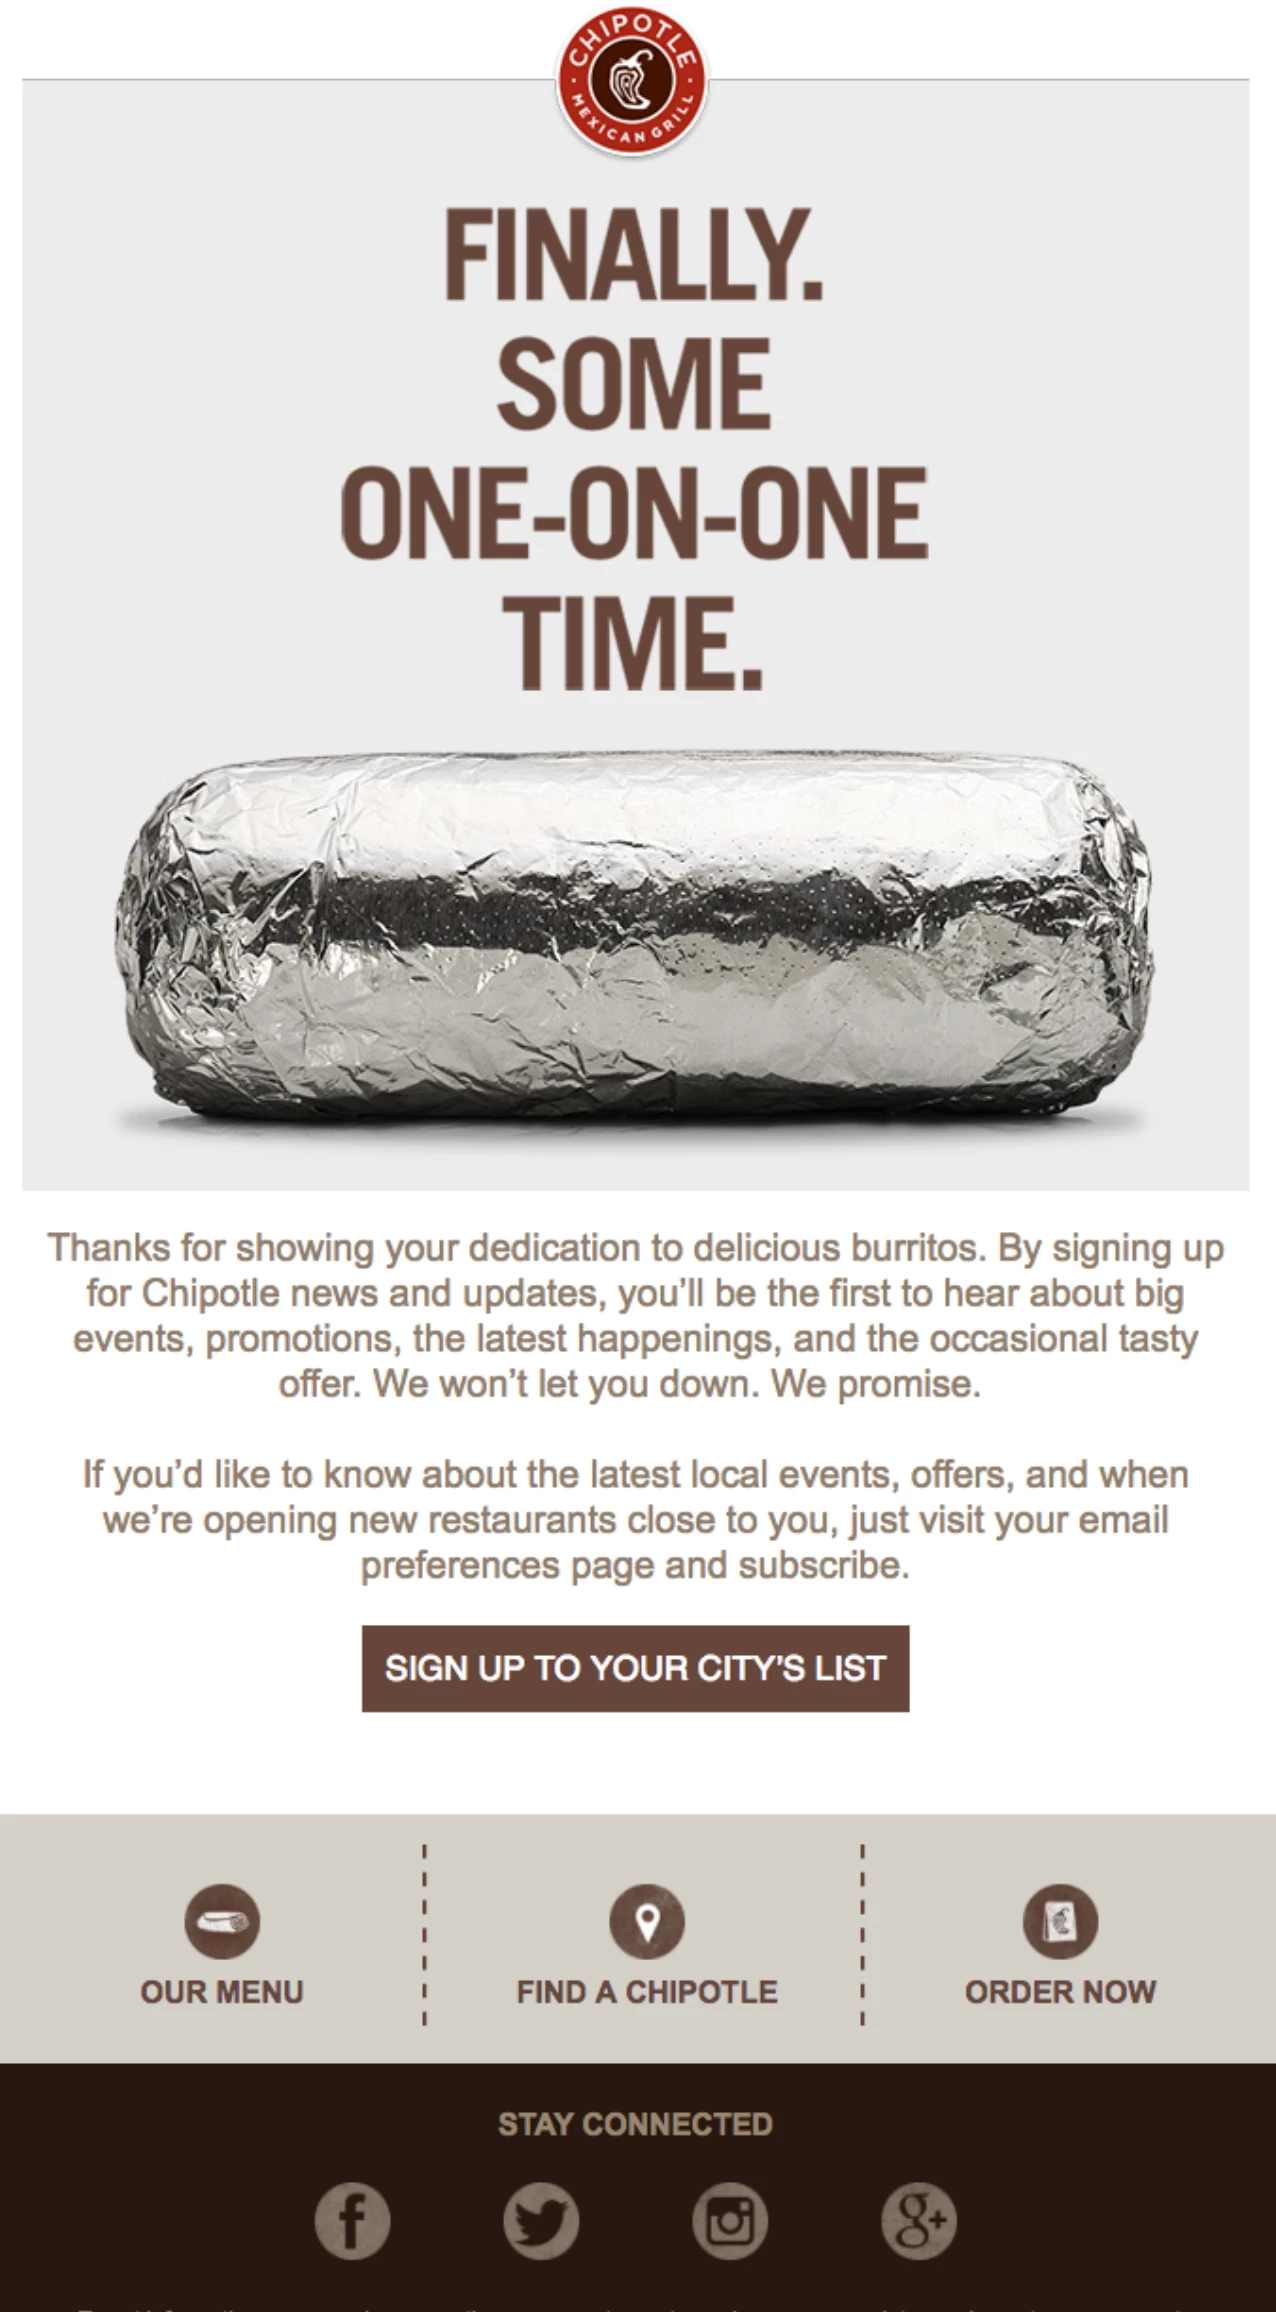 Chipotle welcome email containing an image of a burrito wrapped in foil, with a CTA button that reads 